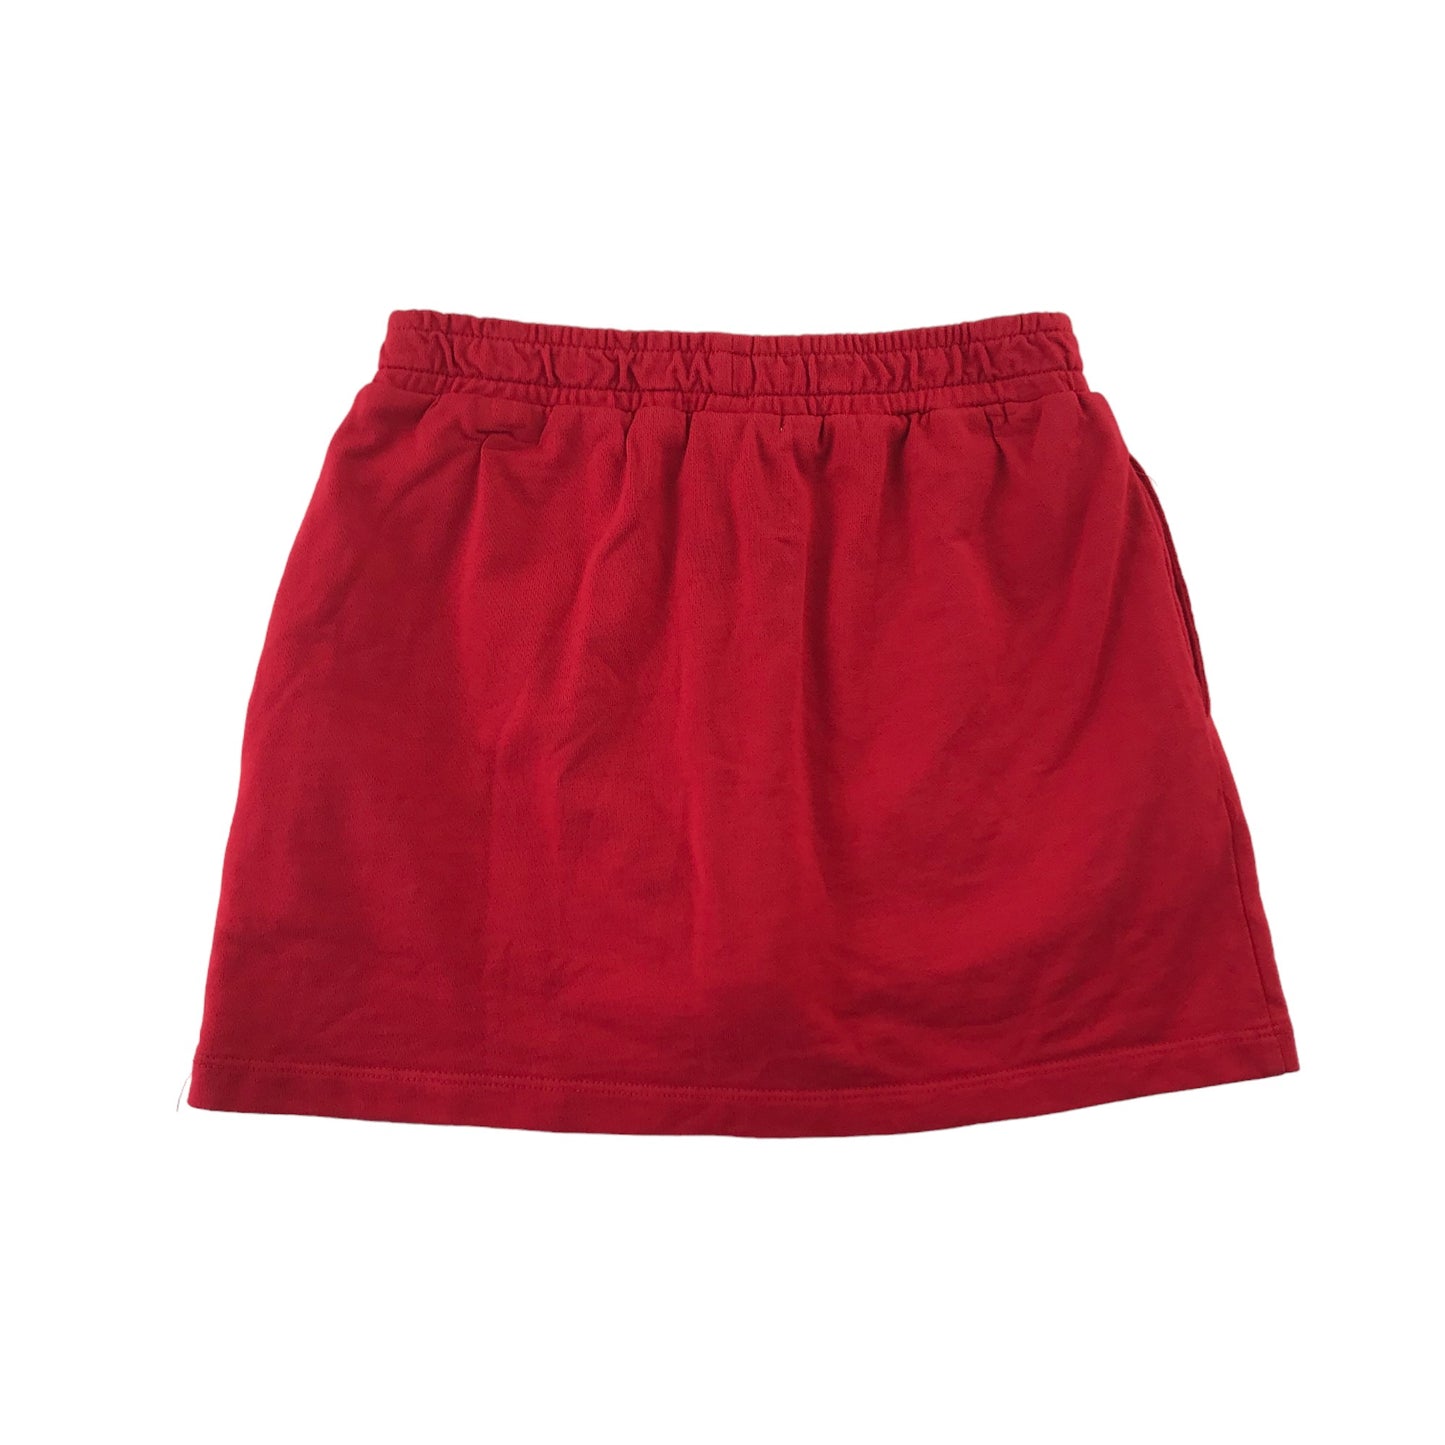 Bossini Skirt Age 6 Red Graphic Design Jersey with under shorts